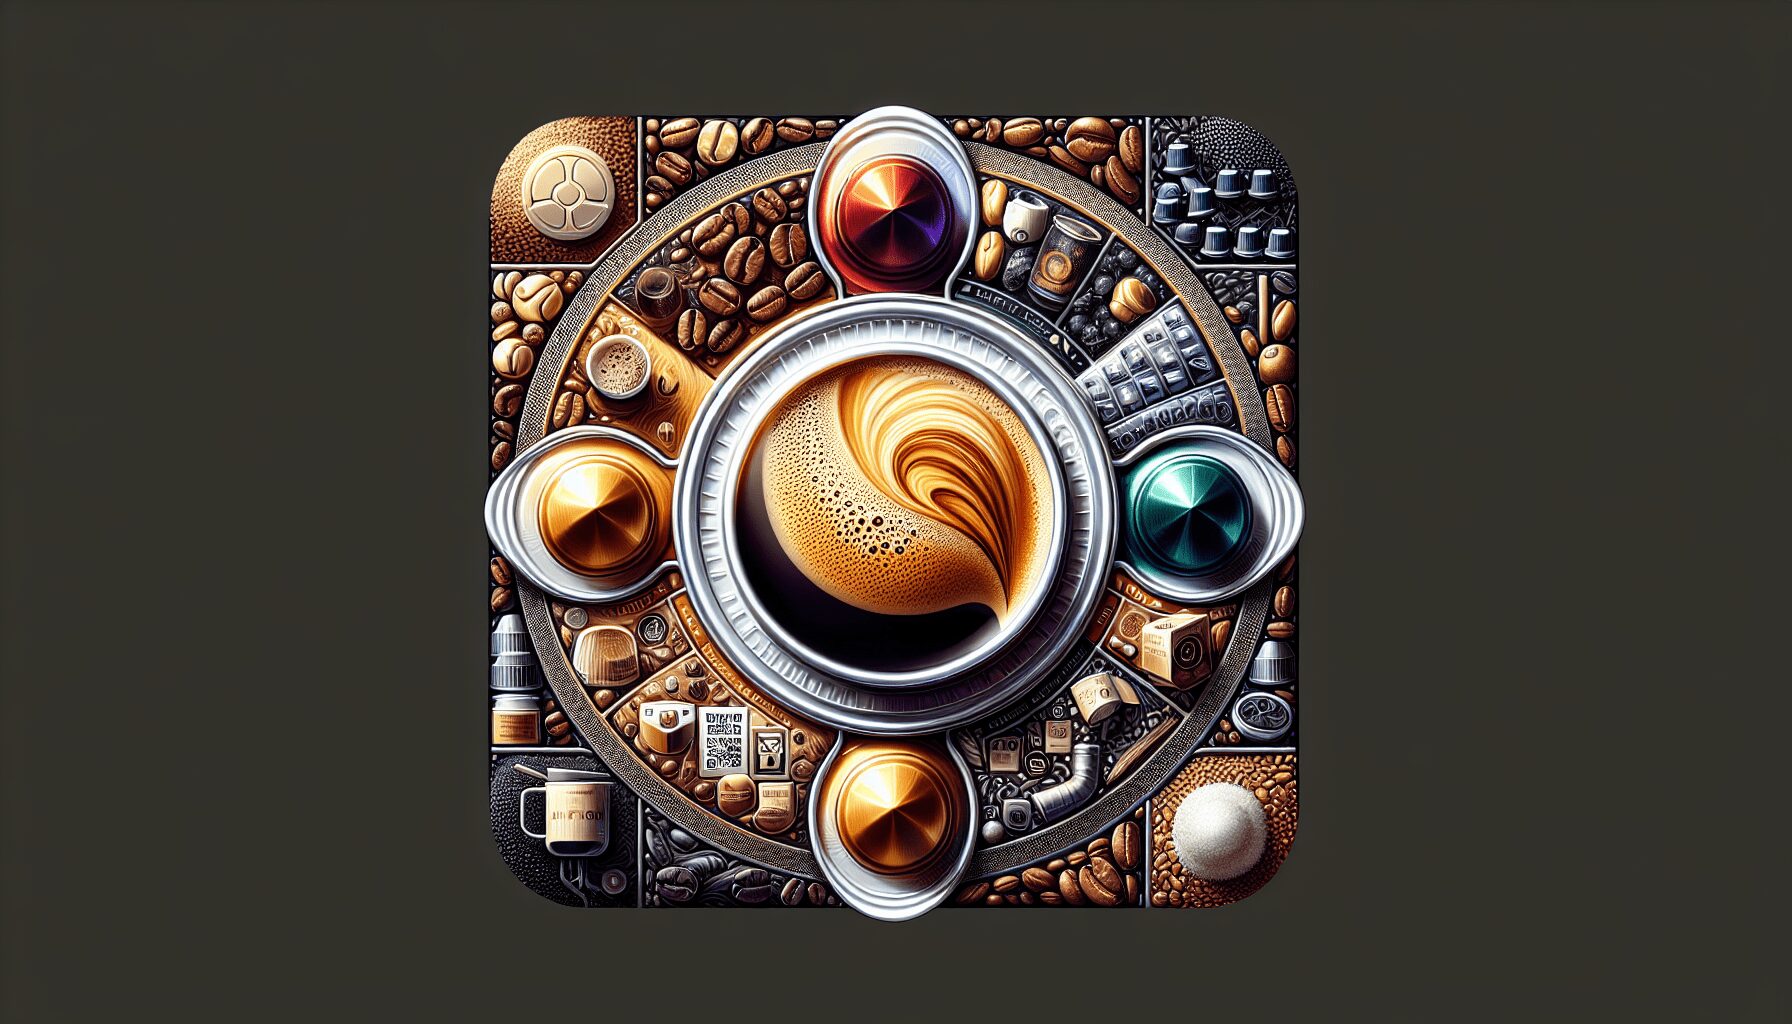 How much caffeine is in a Nespresso?